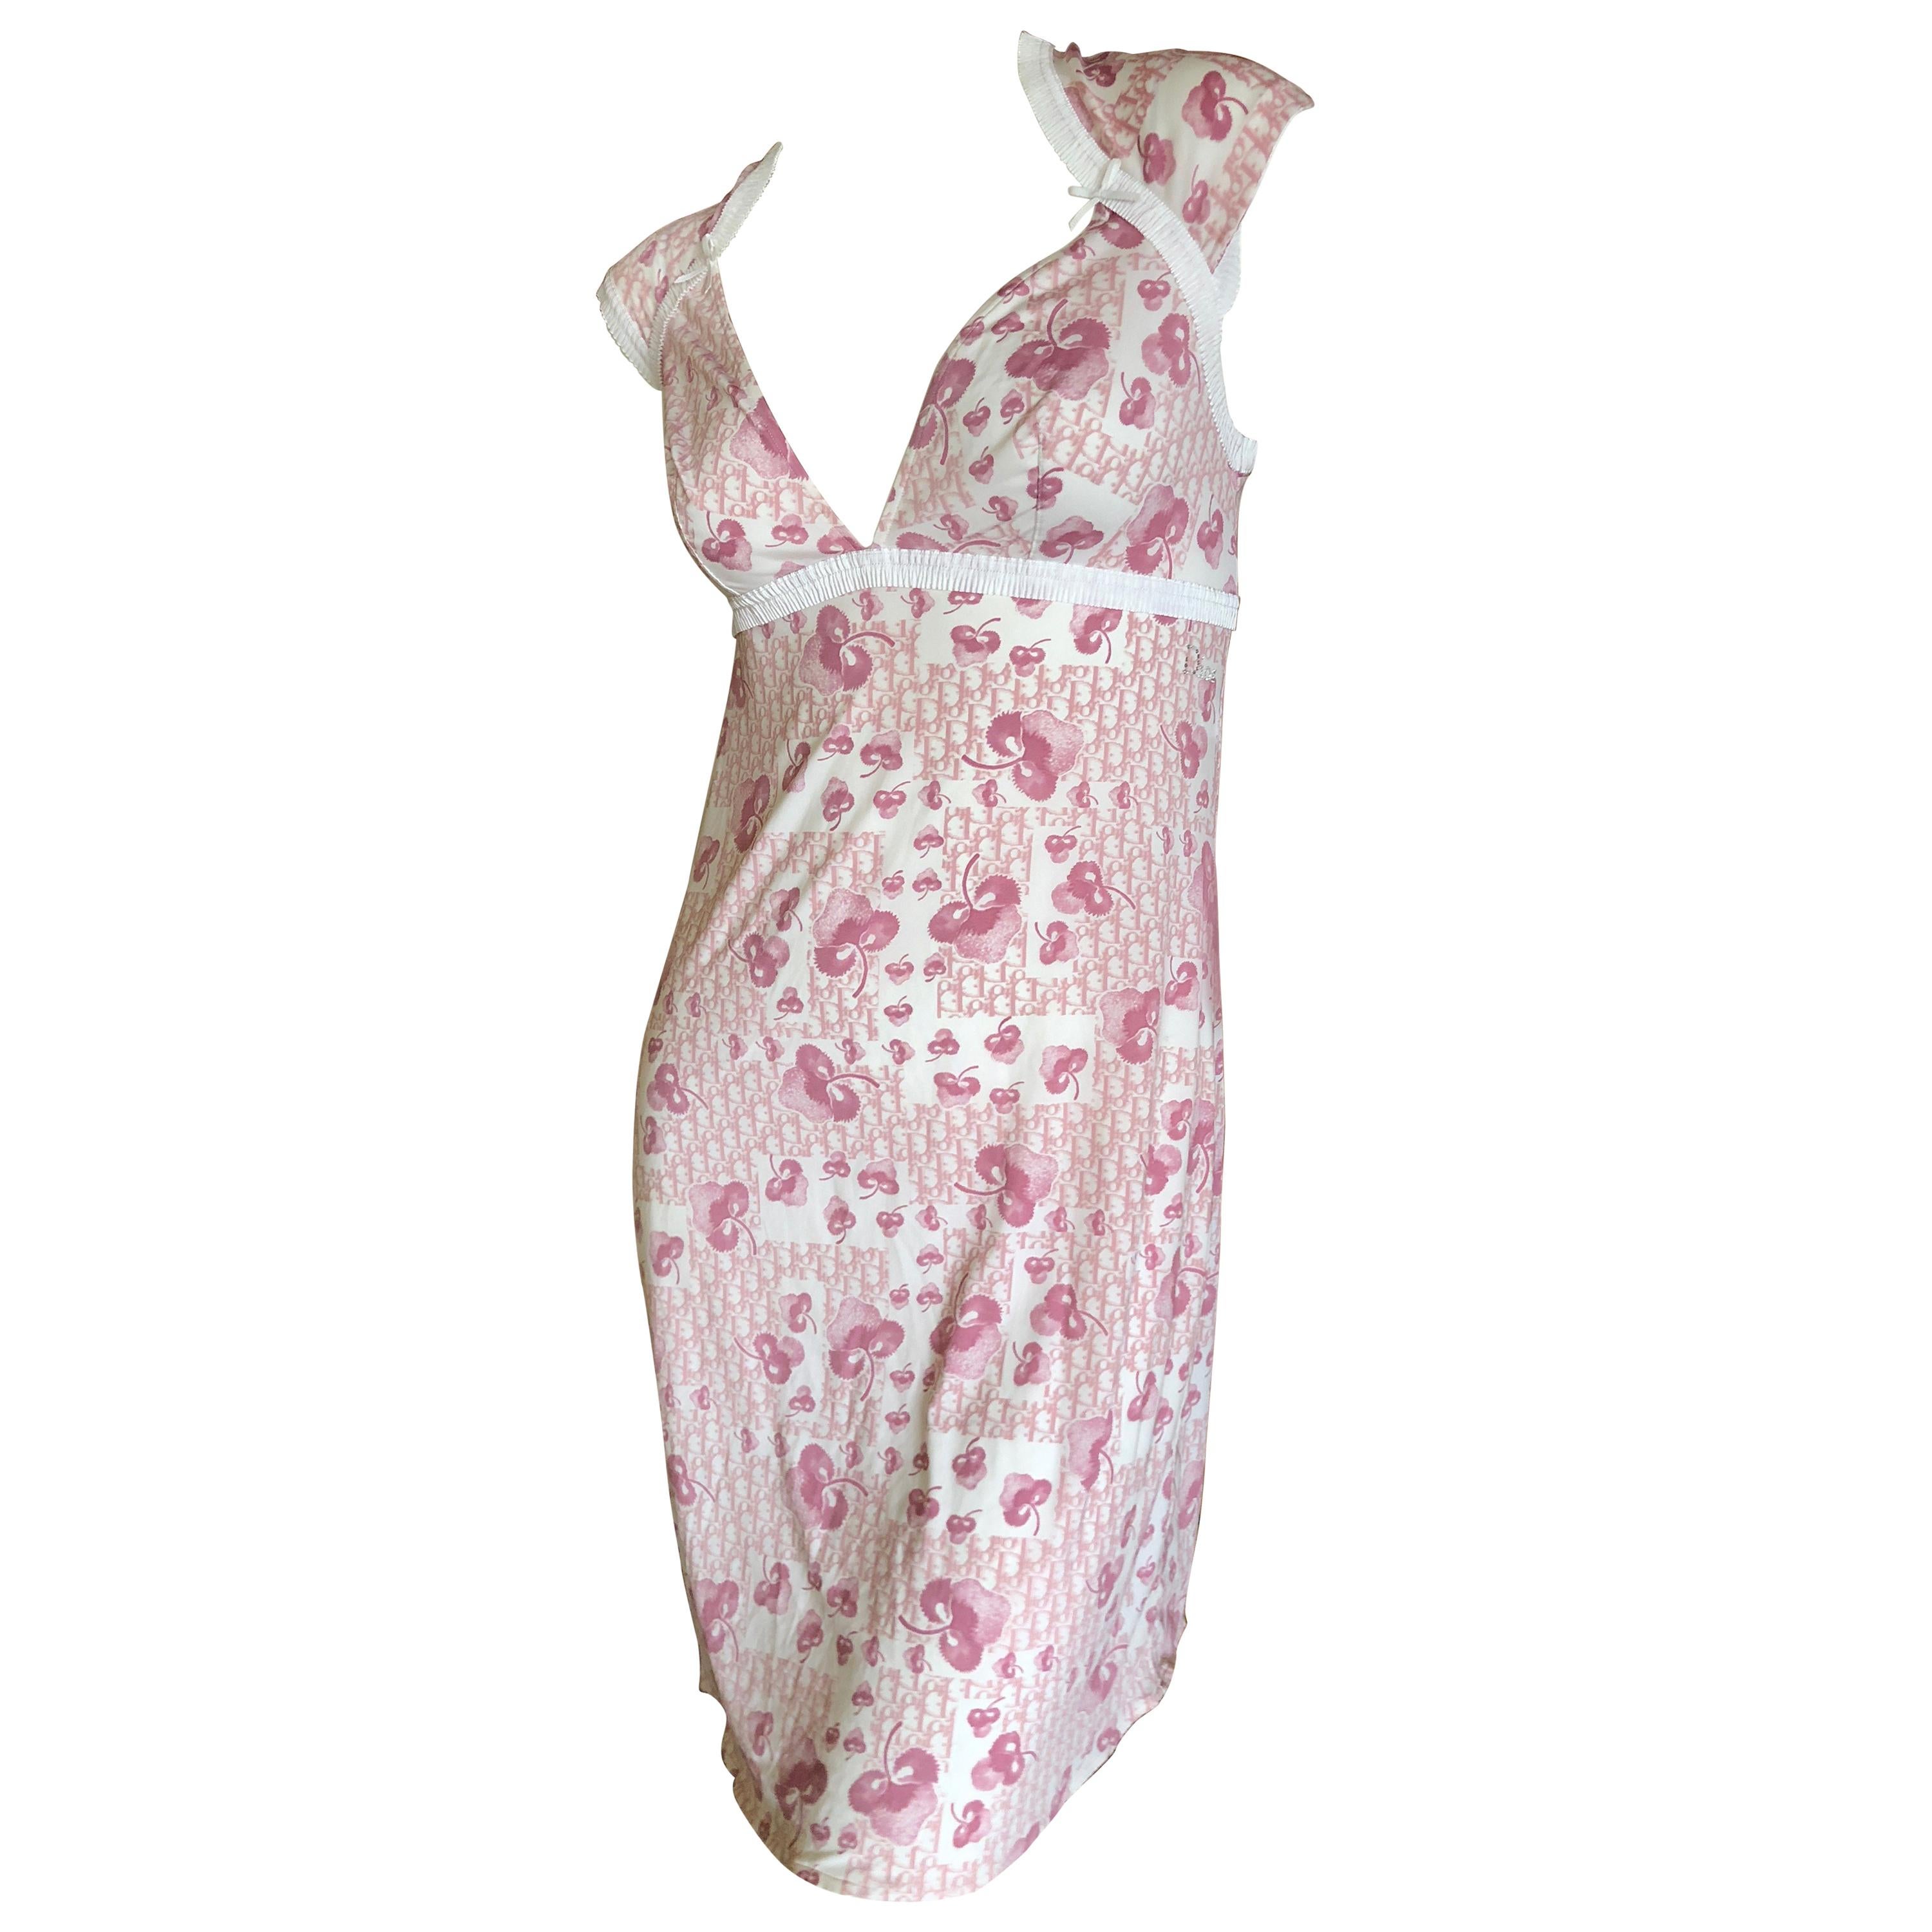 Christian Dior Lingerie by John Galliano Cherry Blossom Pattern Logo Dress For Sale